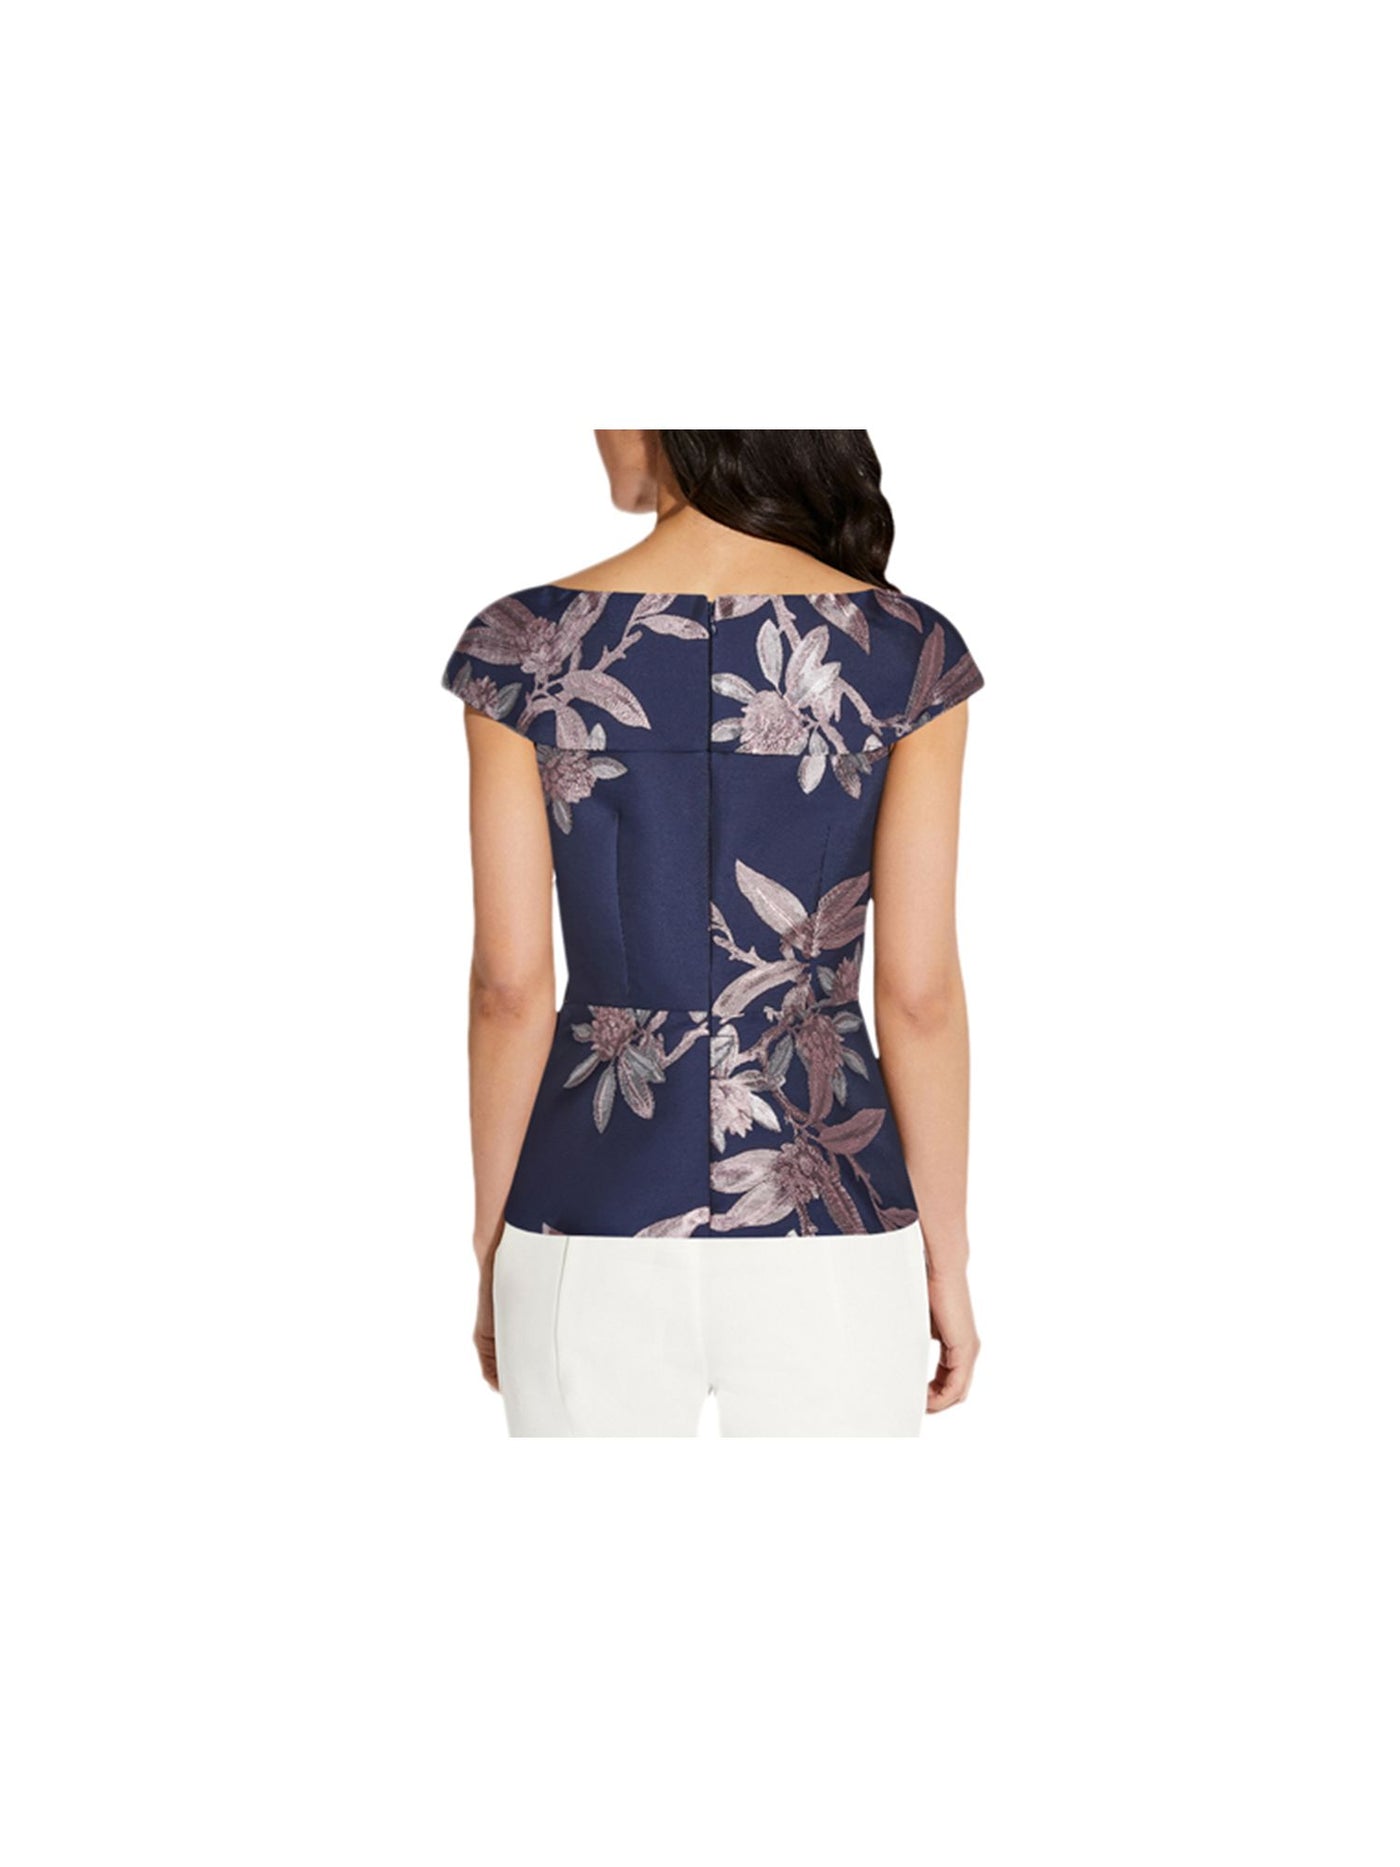 ADRIANNA PAPELL Womens Navy Zippered Darted Floral Flutter Sleeve V Neck Party Peplum Top 2